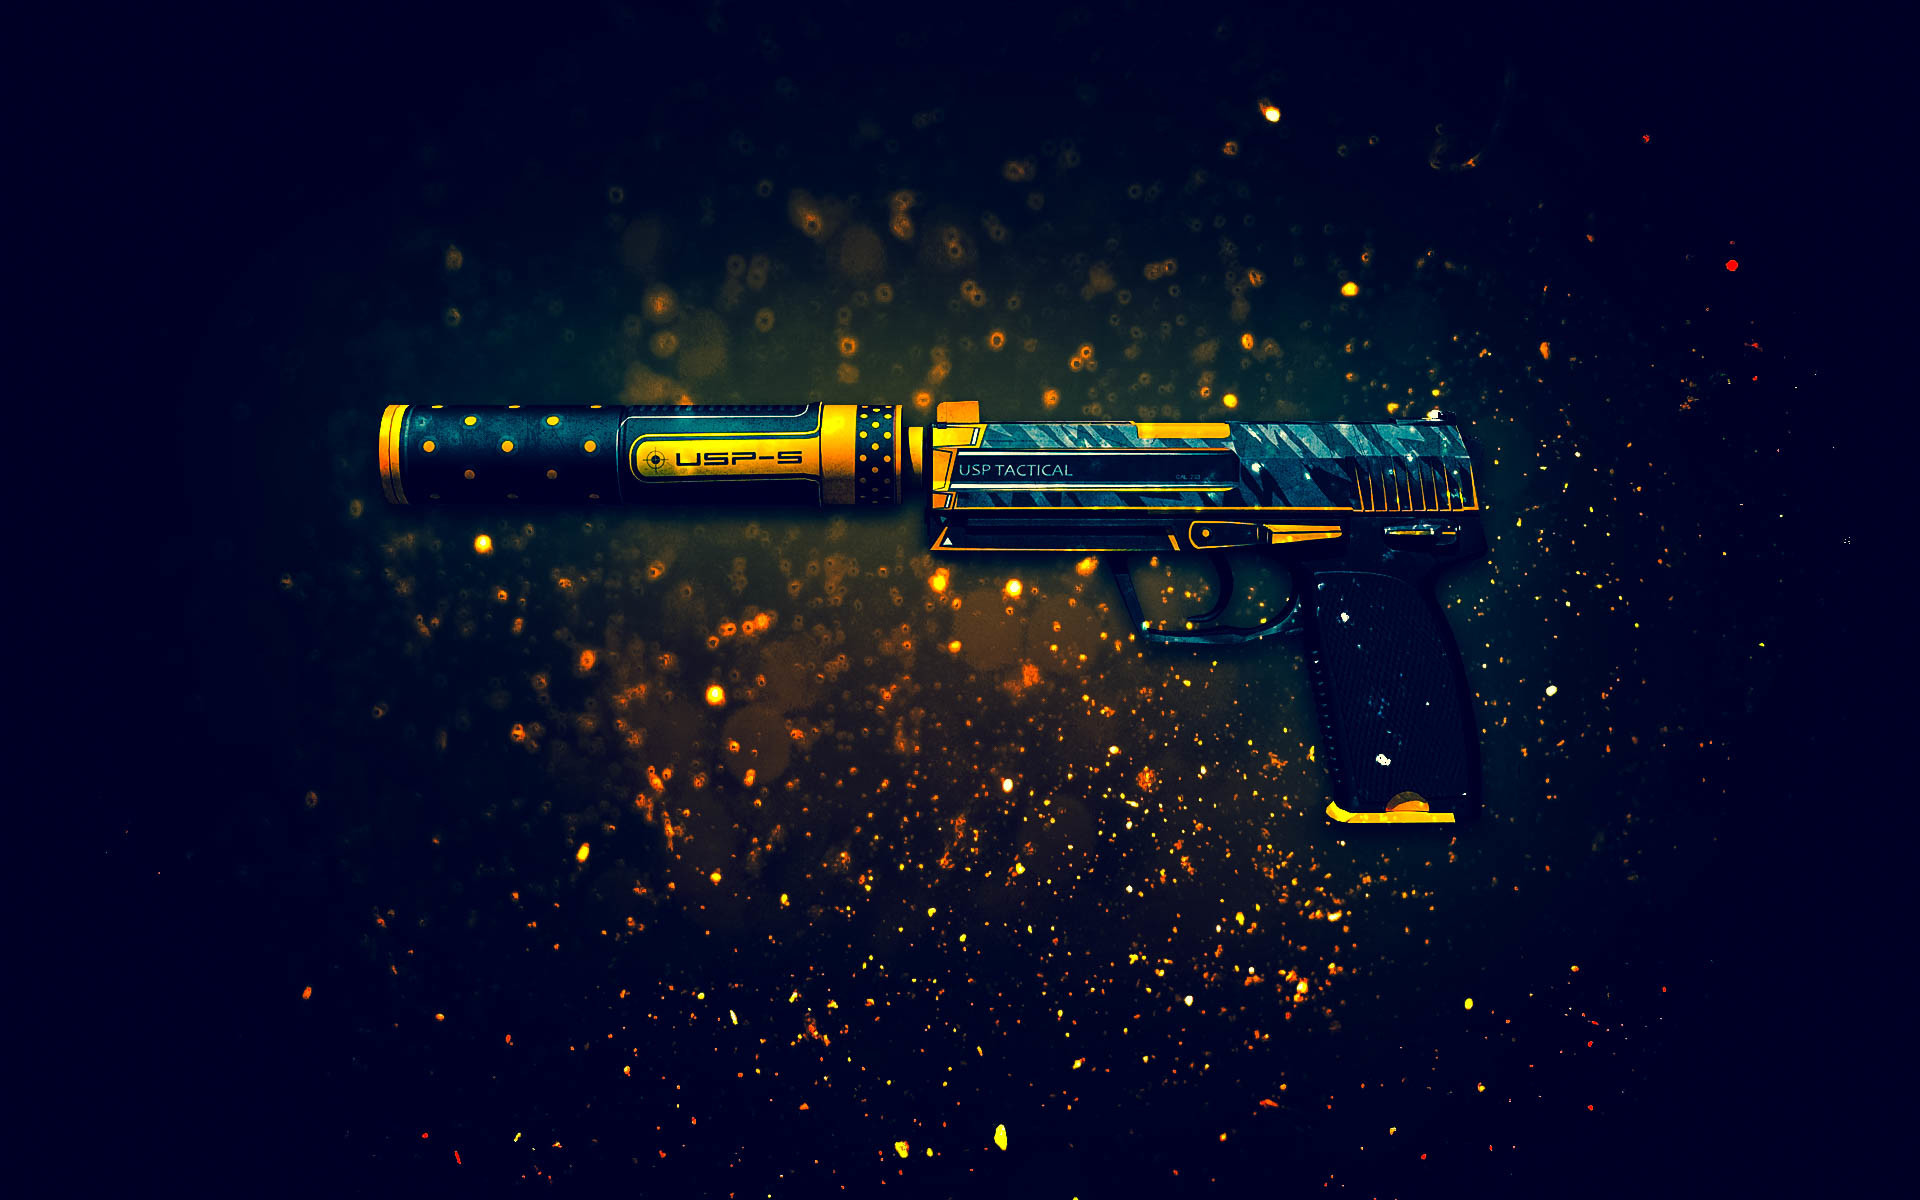 CS:GO Weapon Skin Wallpapers on Behance | My CSGO collection | Pinterest |  Weapons and Wallpaper